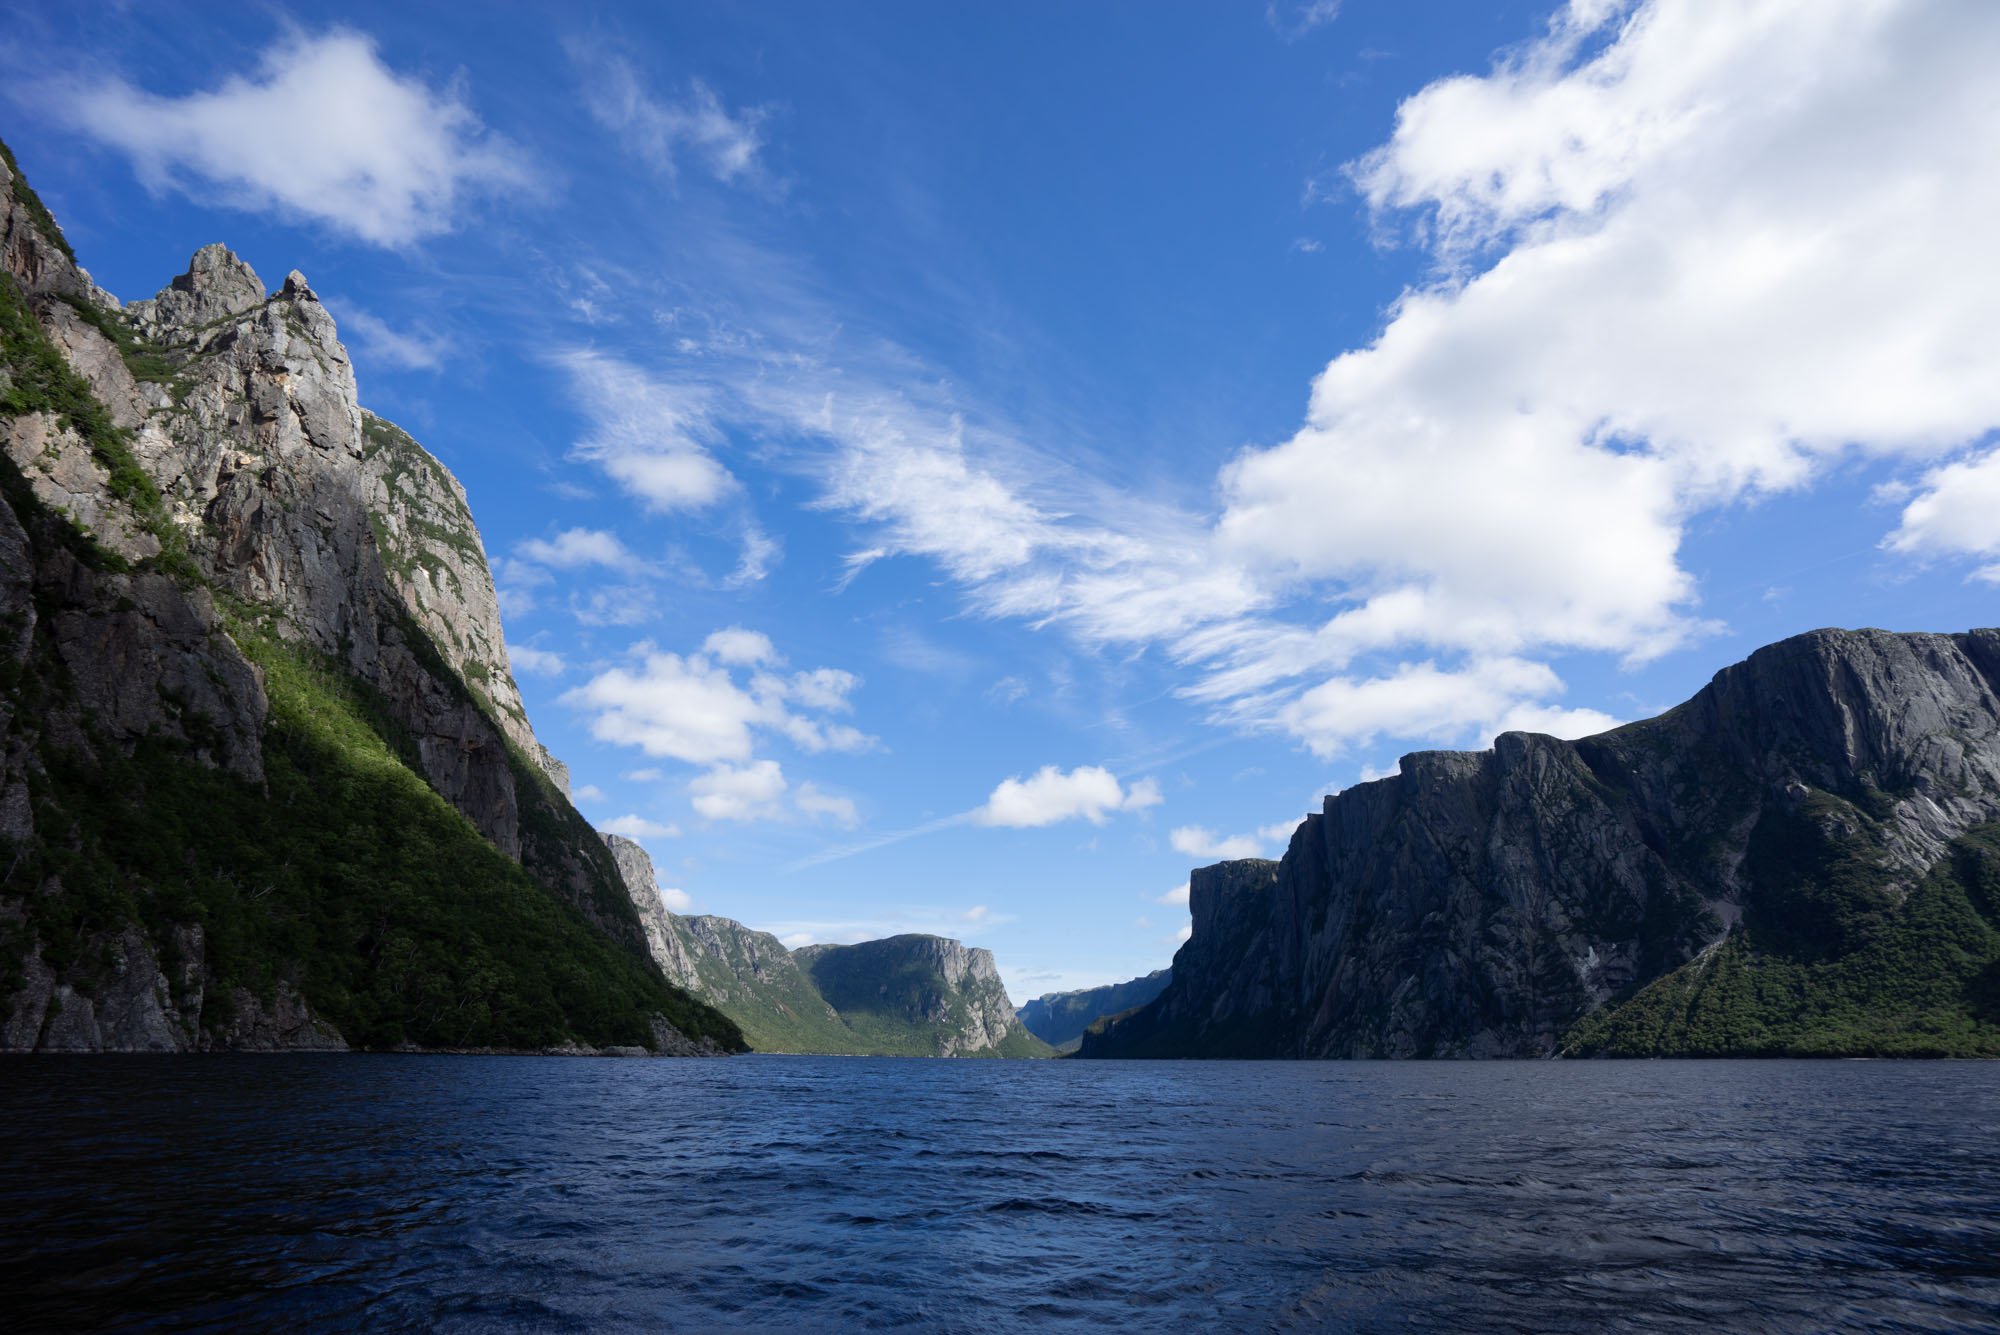  Western Brook Pond from the water 